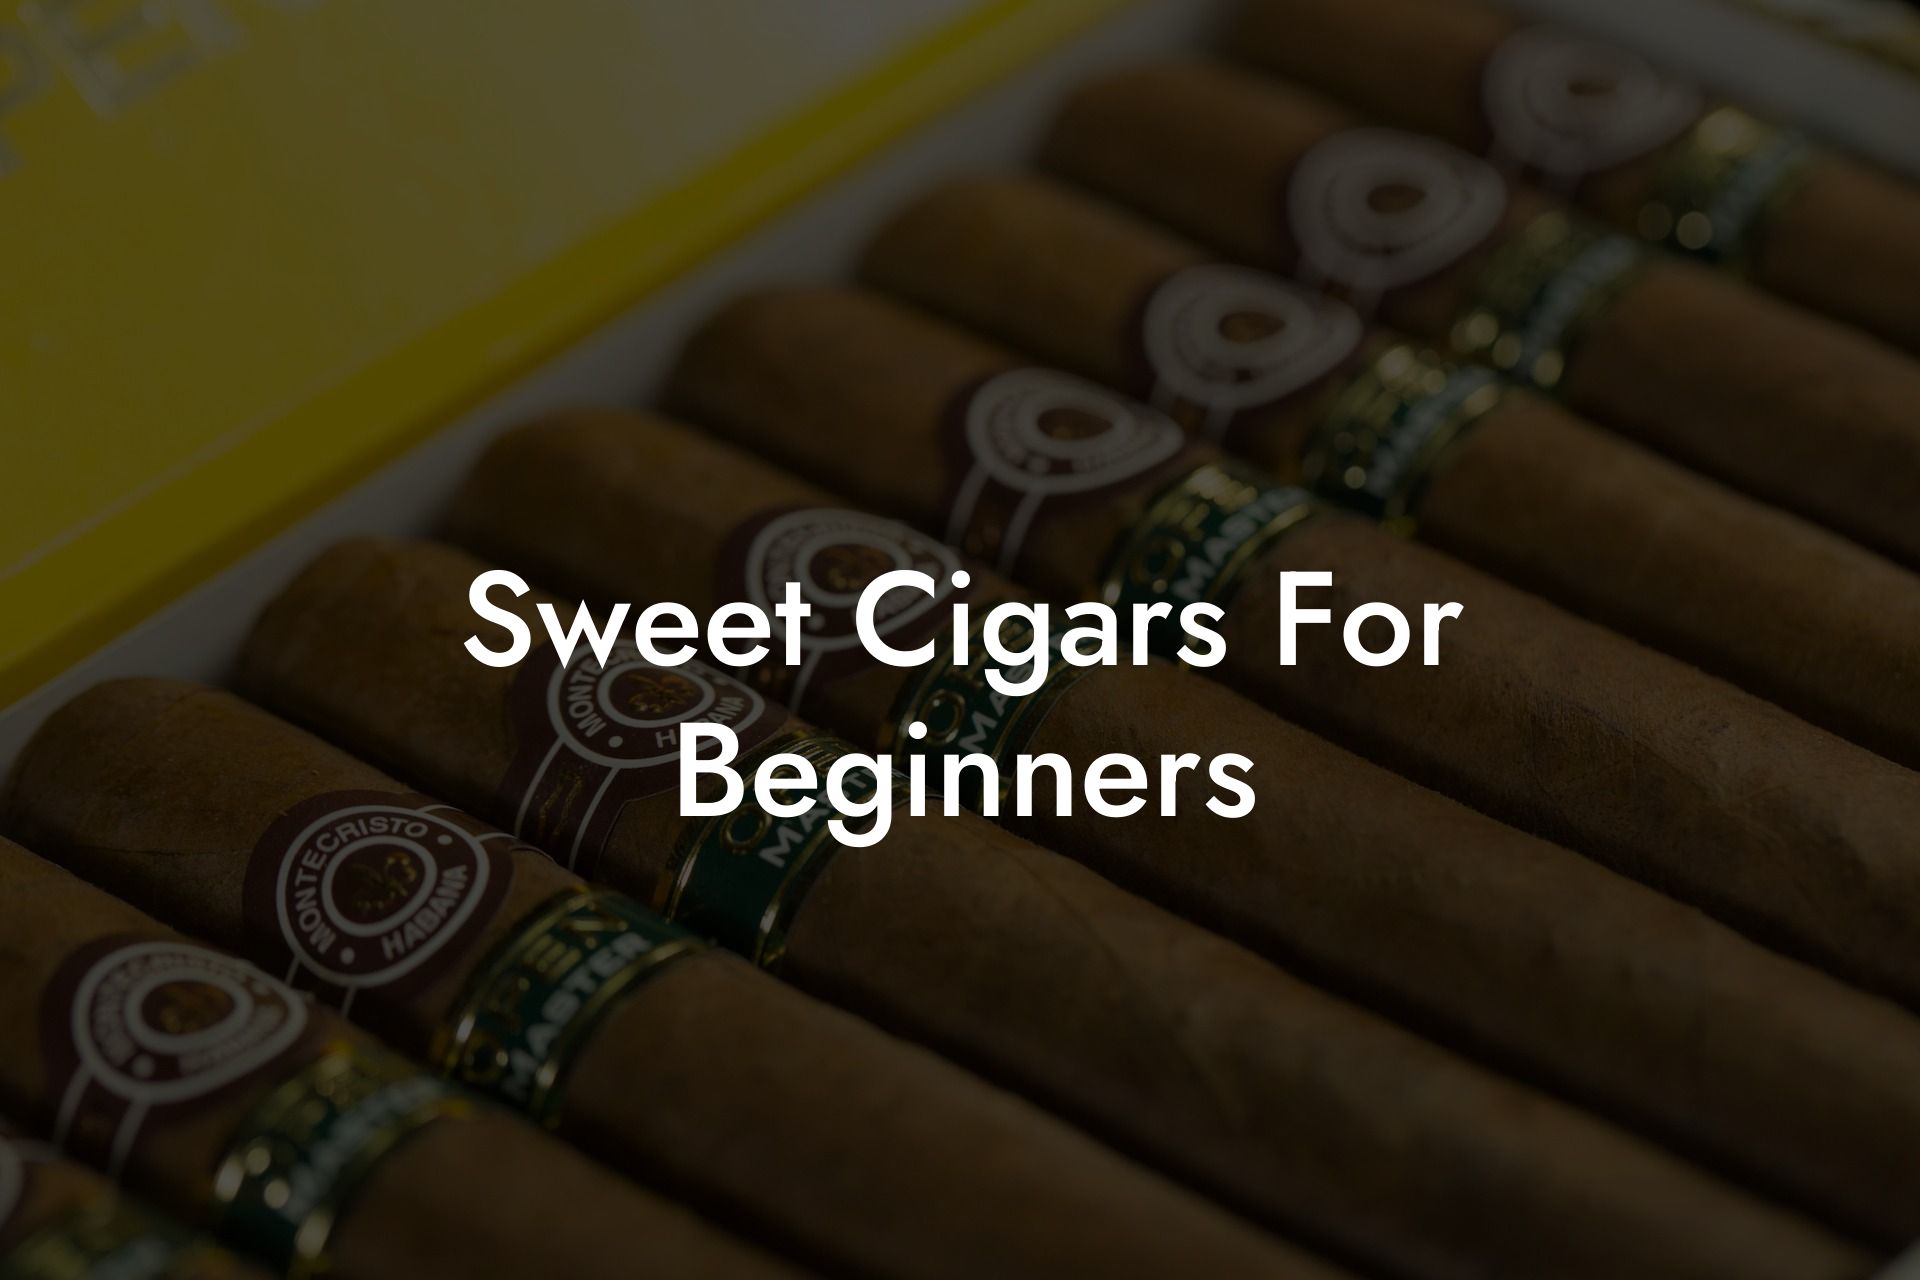 Sweet Cigars For Beginners